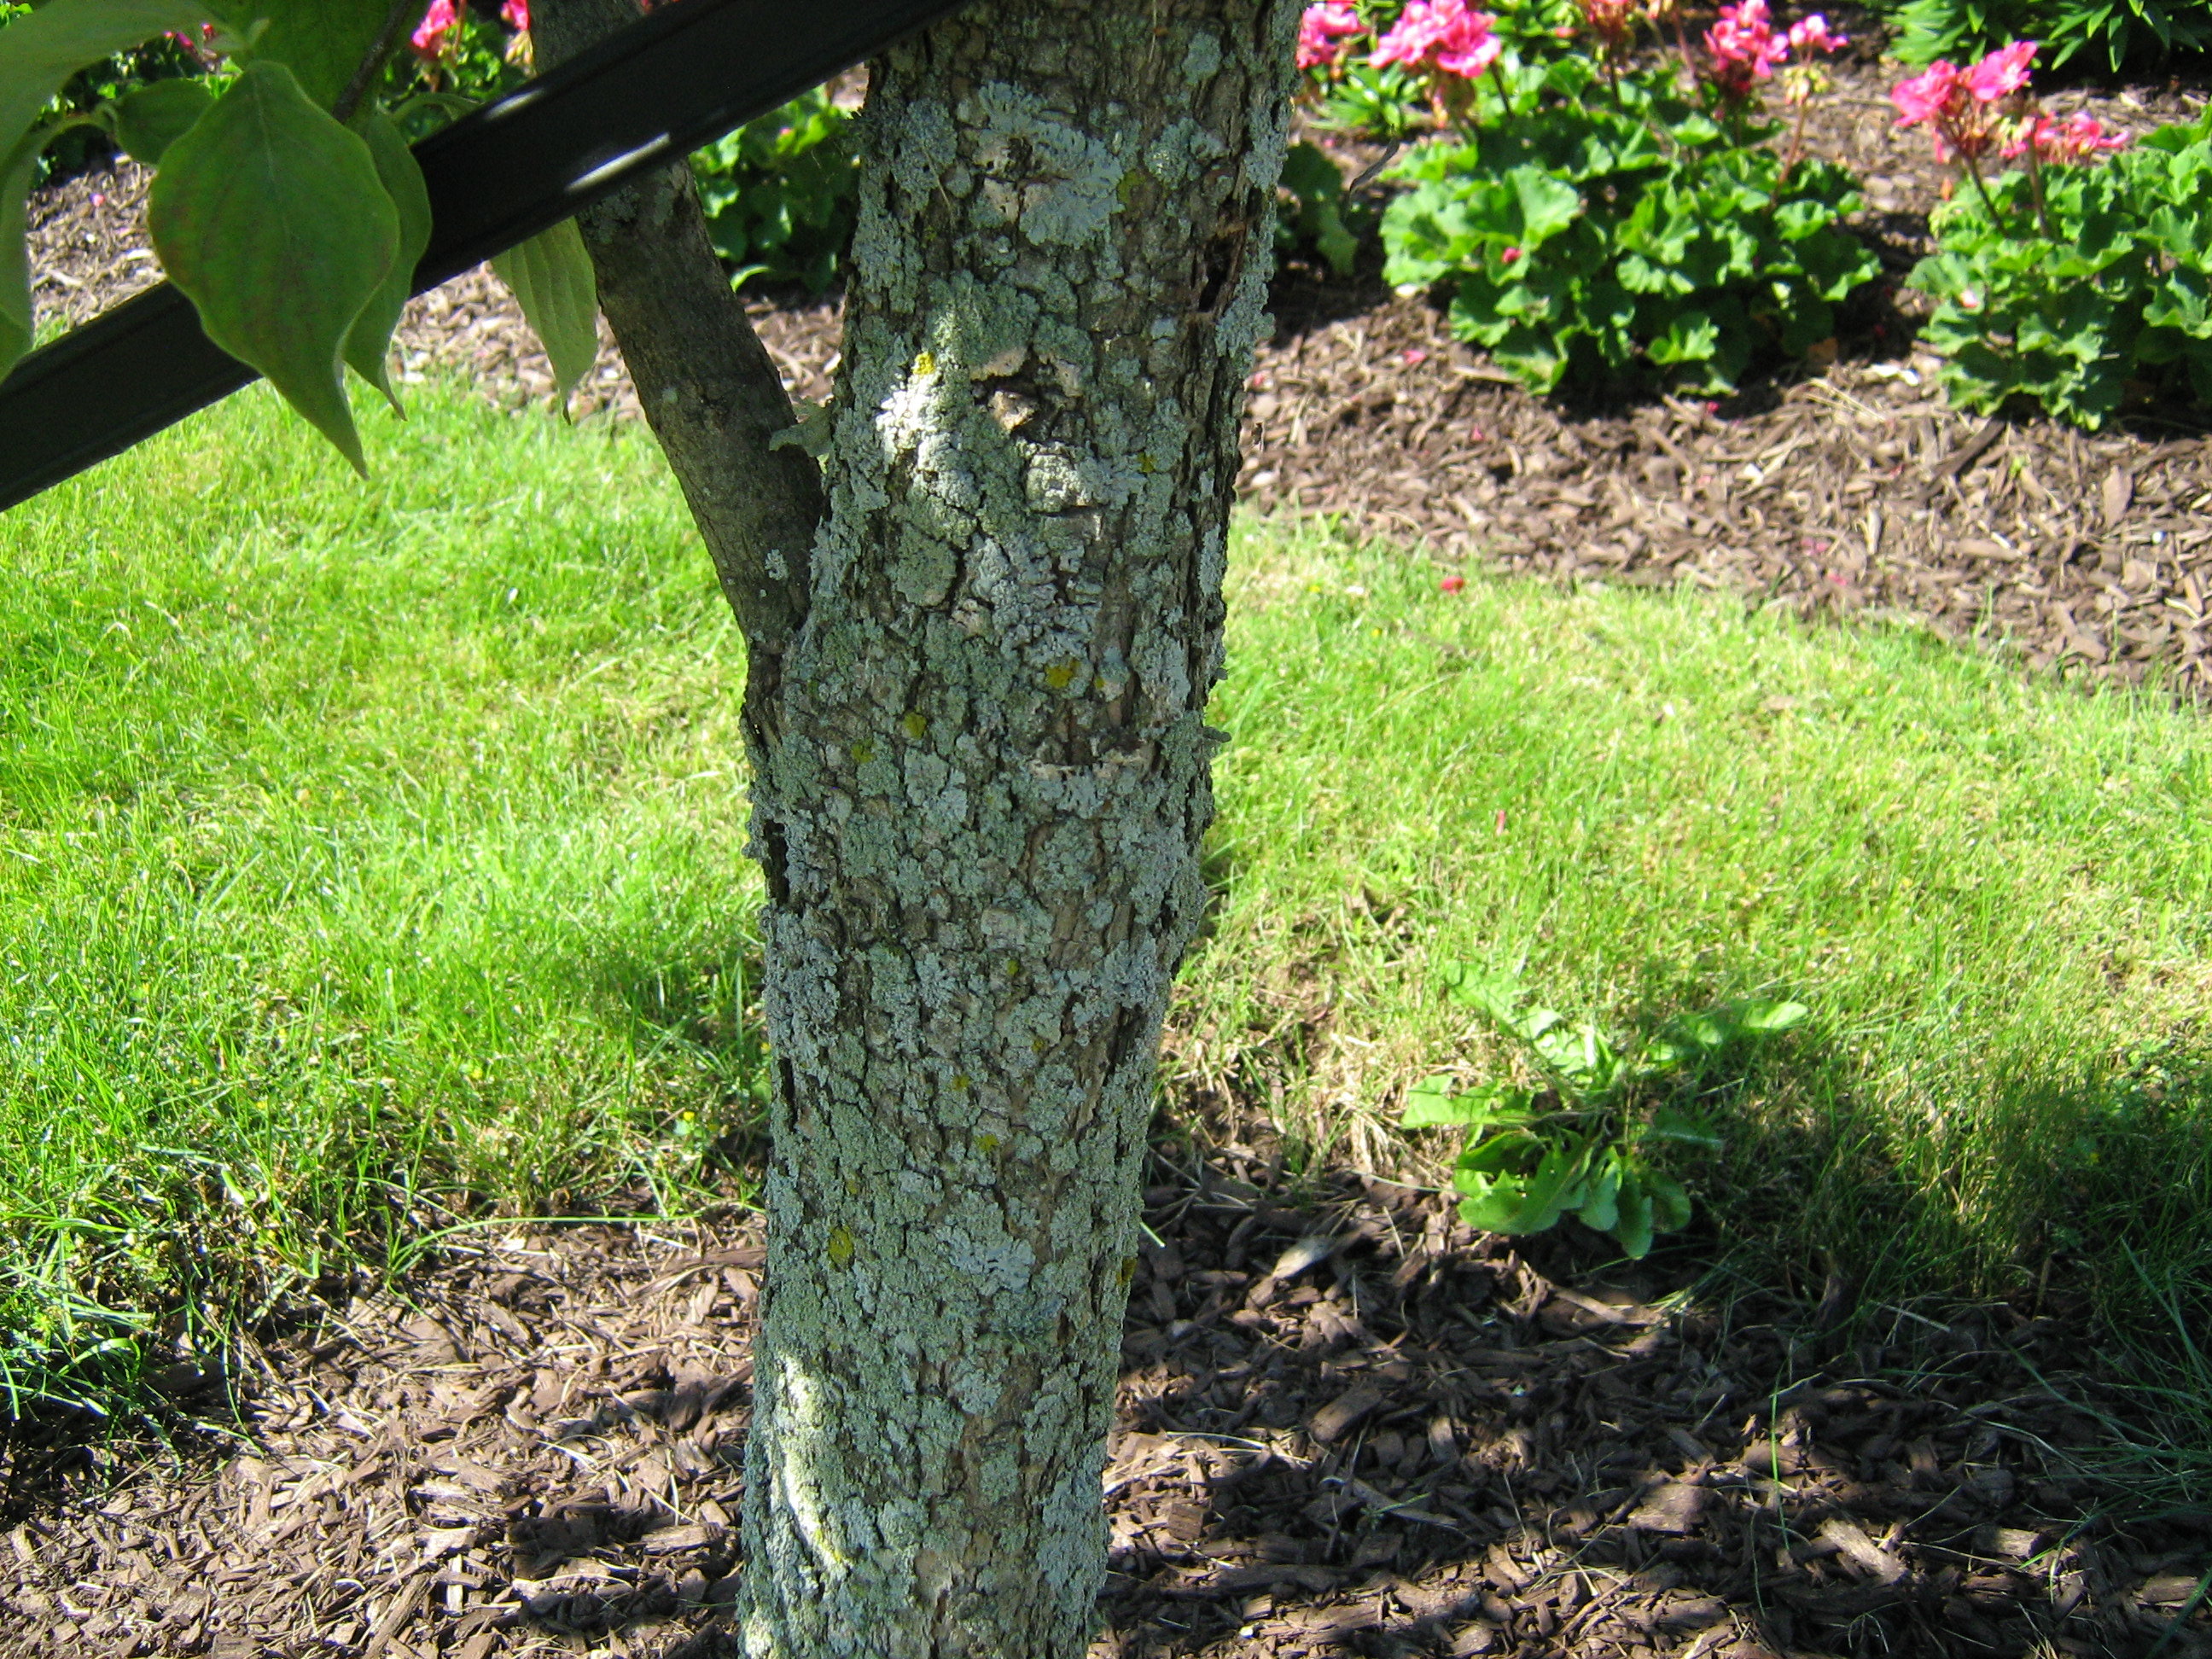 whats wrong with my dogwood tree